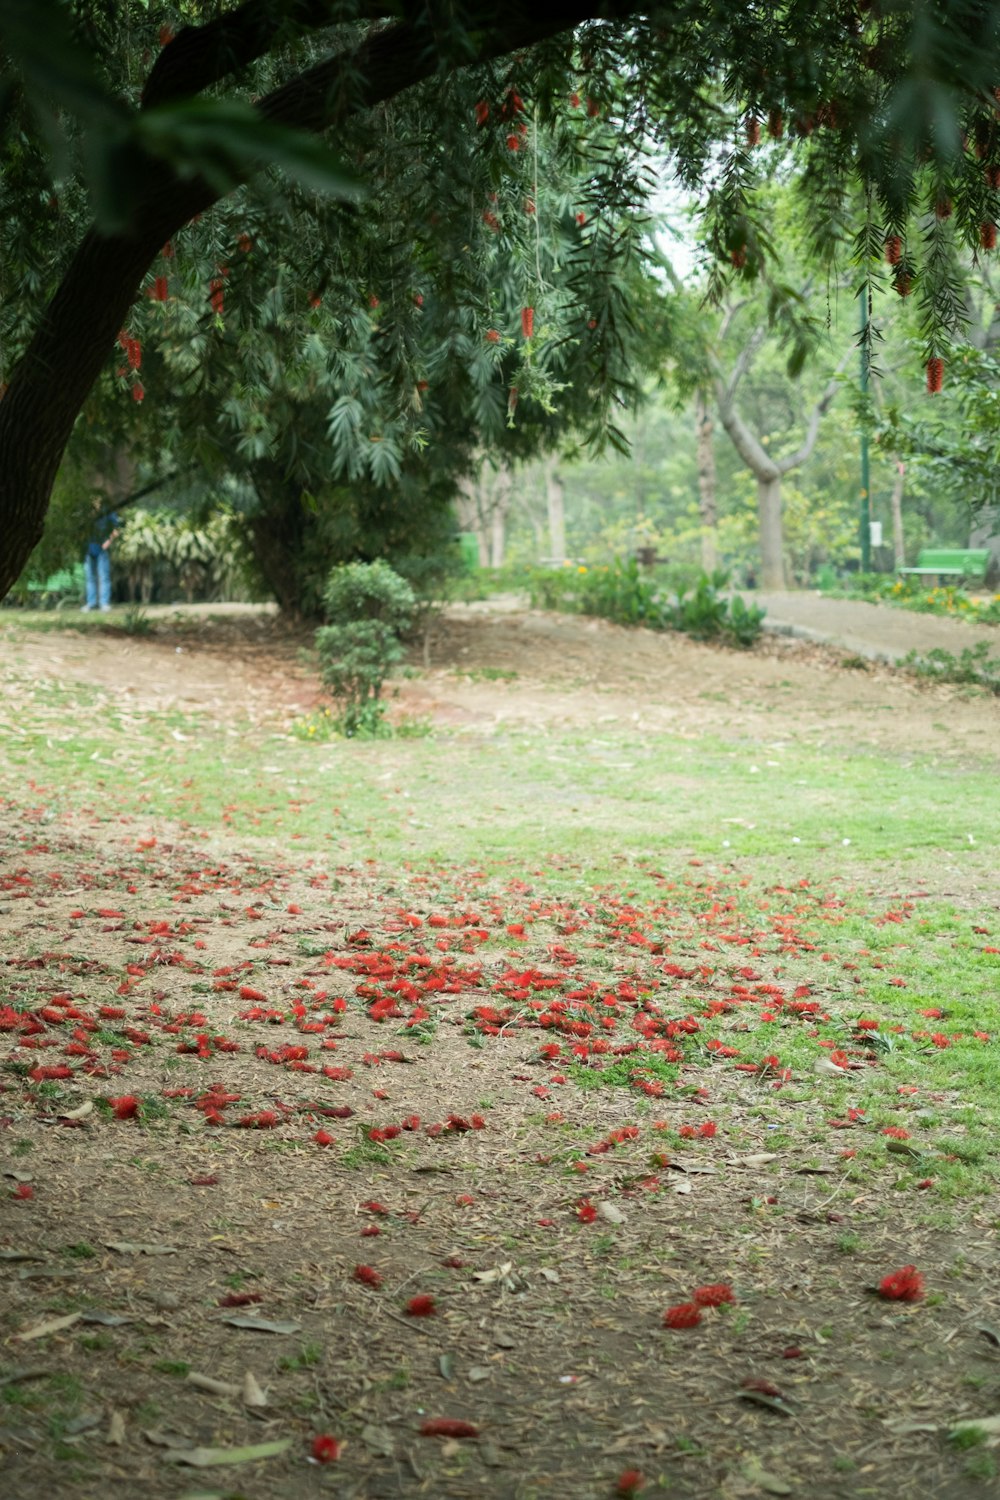 a field with a bunch of red flowers on the ground